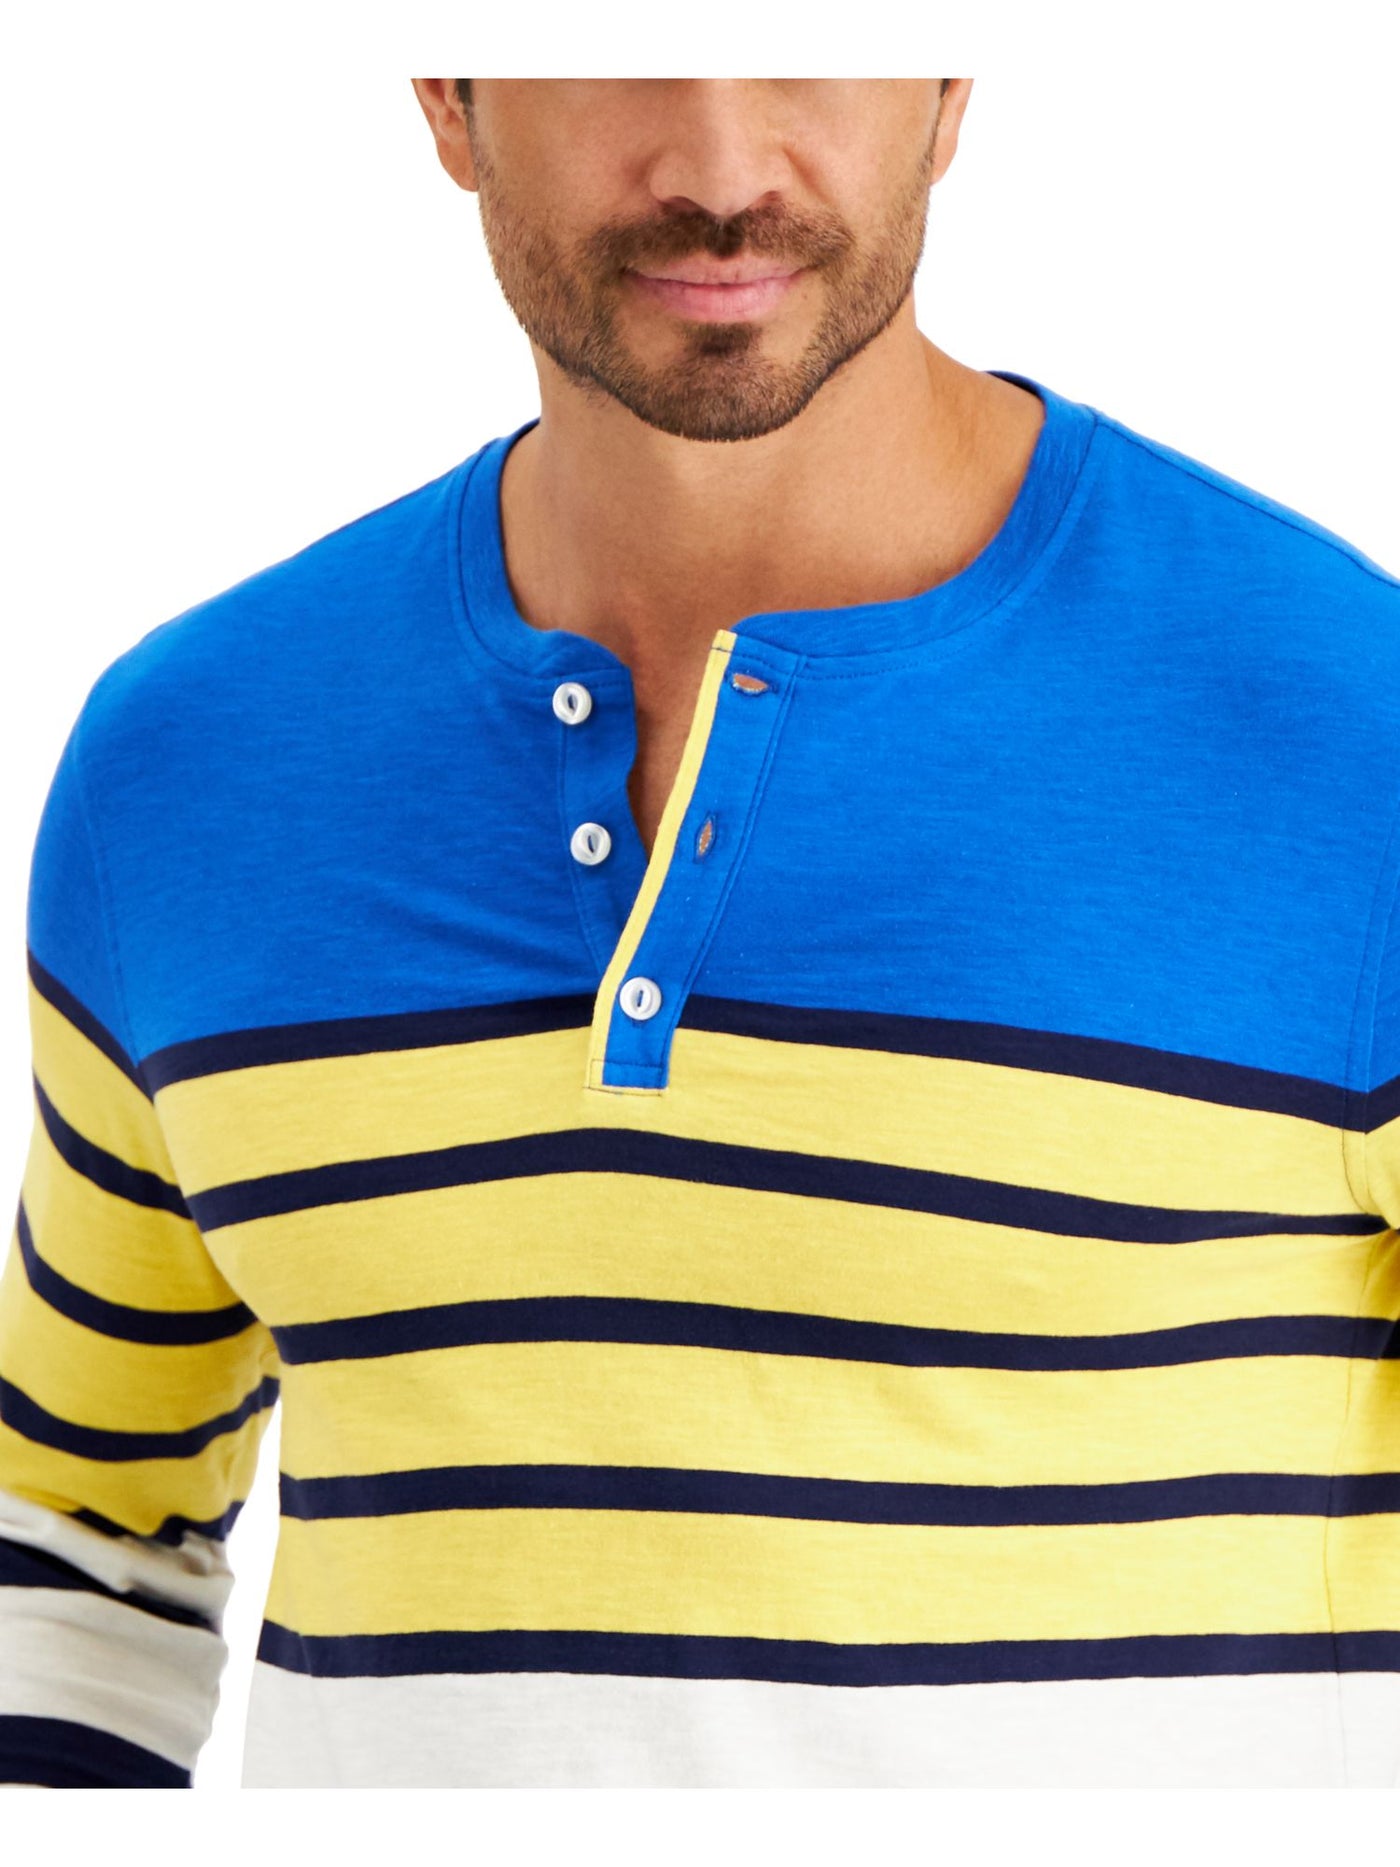 CLUBROOM Mens Blue Striped Classic Fit Henley Shirt S